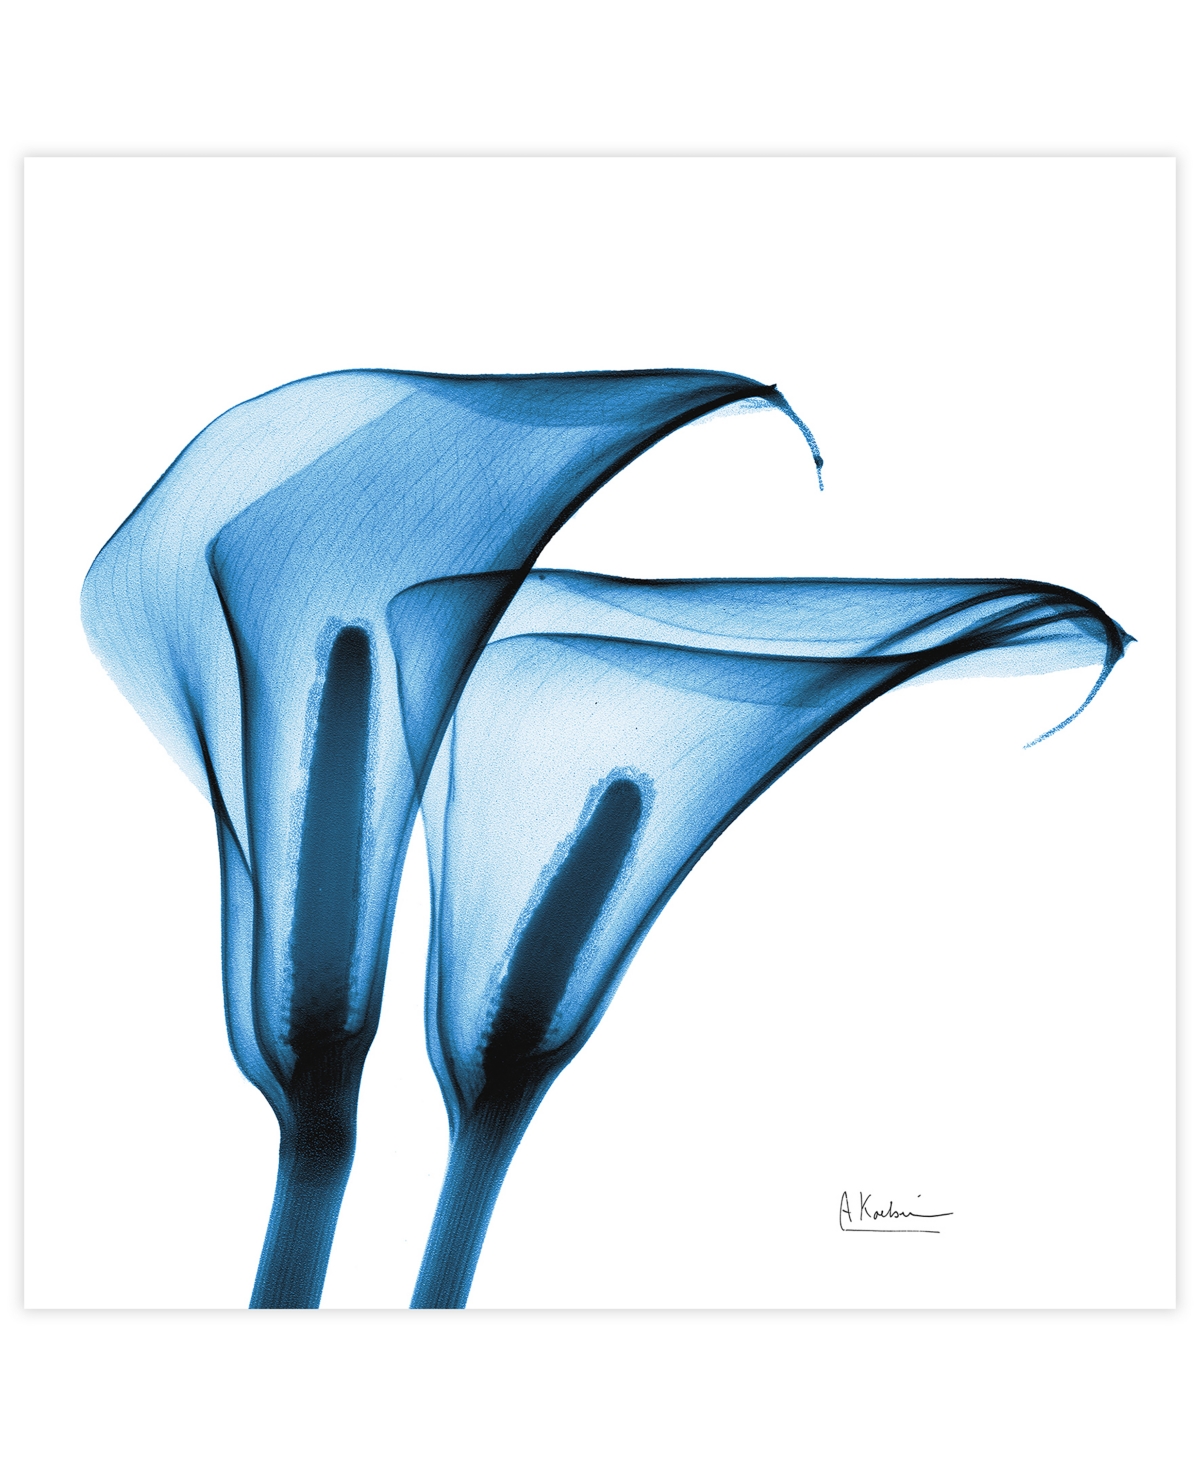 Empire Art Direct "indigo Calla Lilies" Frameless Free Floating Tempered Glass Panel Graphic Wall Art, 24" X 24" X 0.2 In Blue